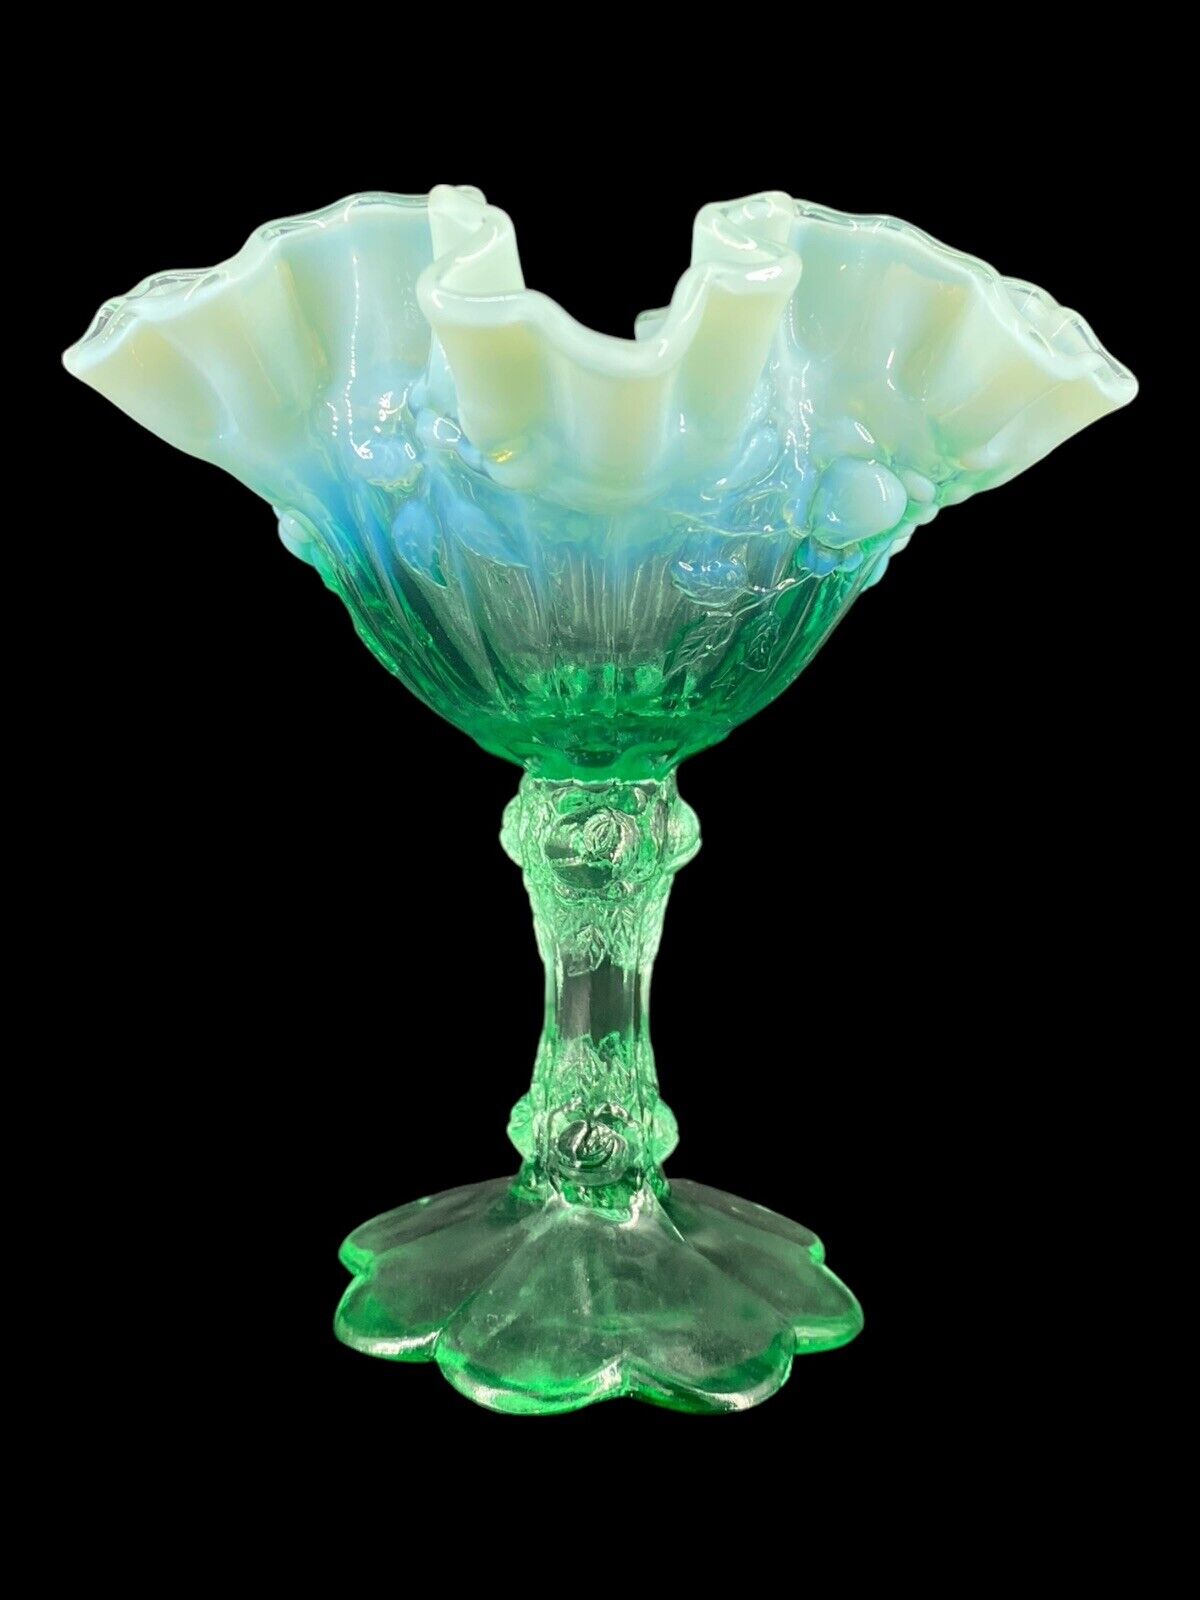 Vtg Fenton Art Glass Green Opalescent Candy Dish Compote Cabbage Rose Motif EX+